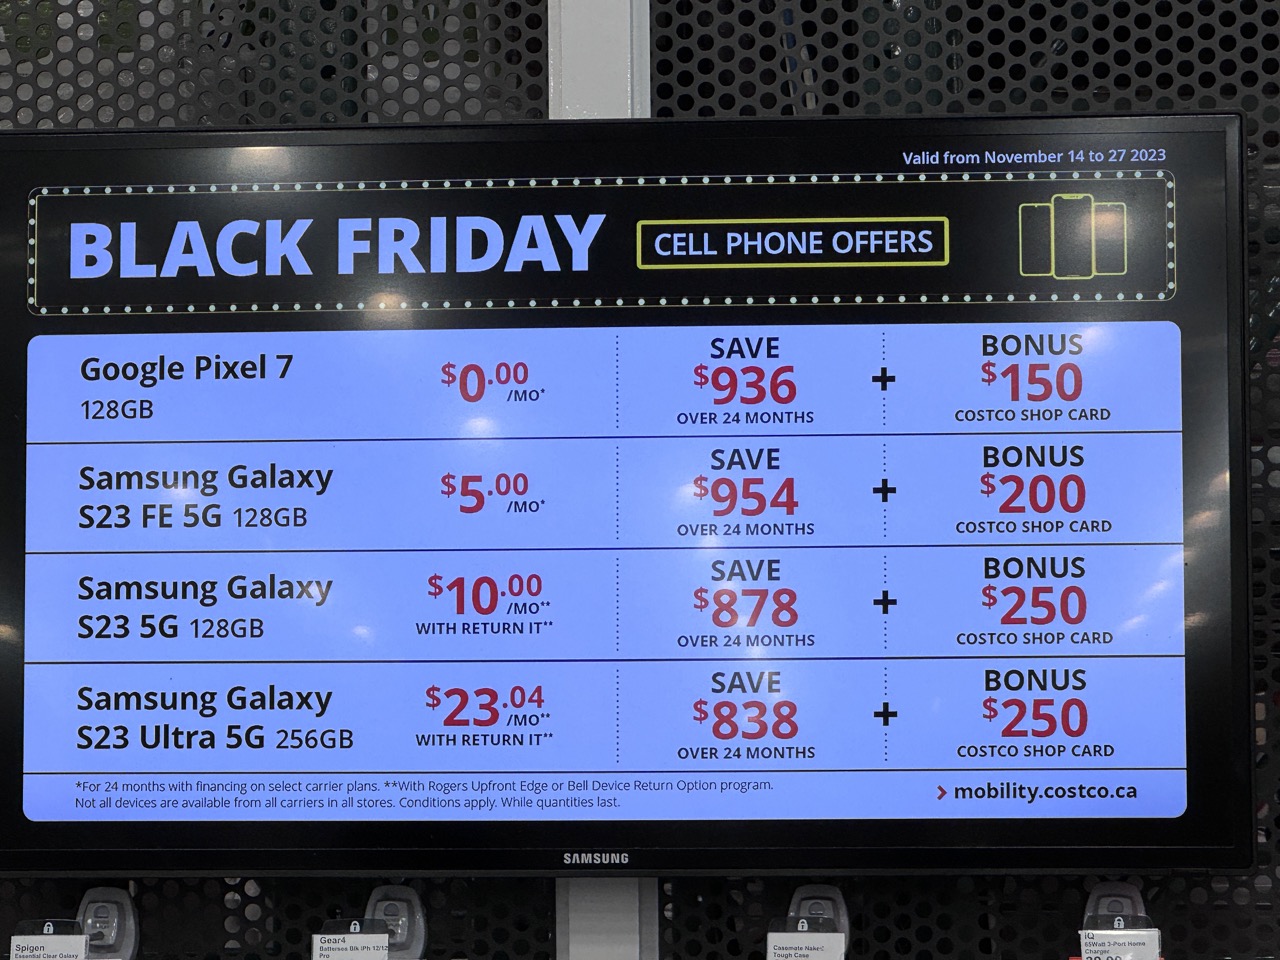 Black Friday deals to shop right now, including tech, home and beauty deals  - ABC7 San Francisco